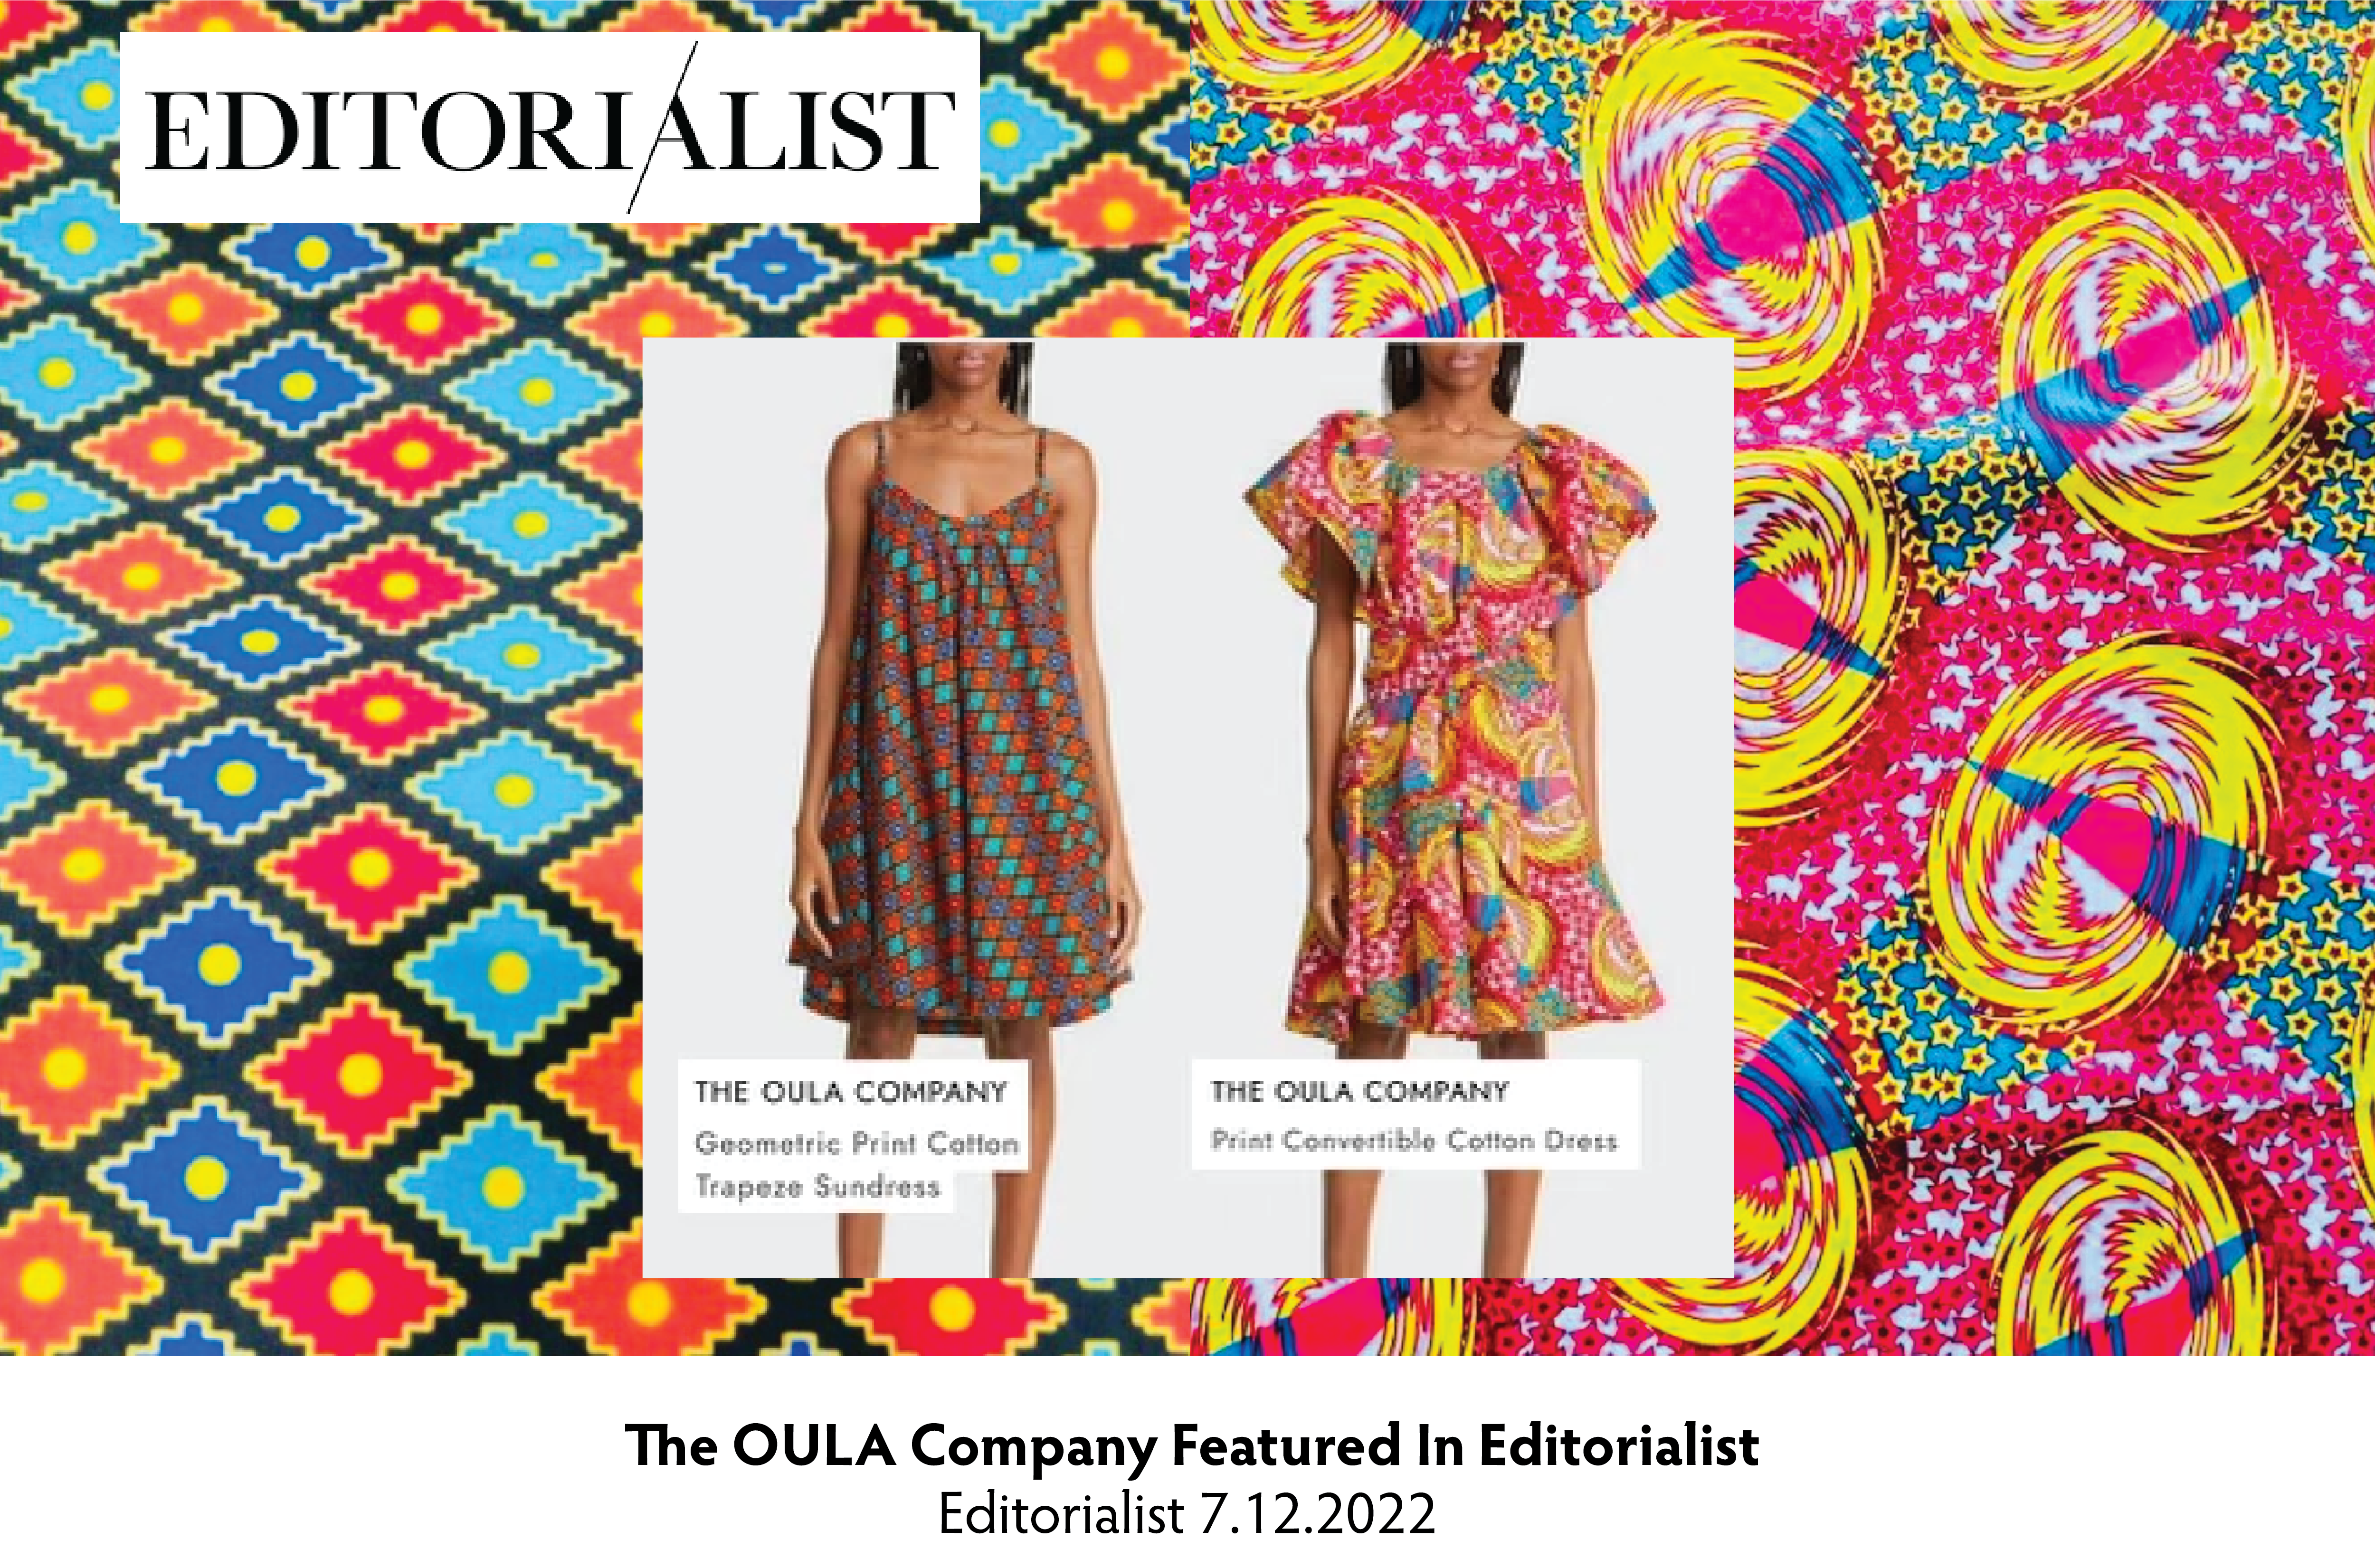 The OULA Company Featured in Editorialist